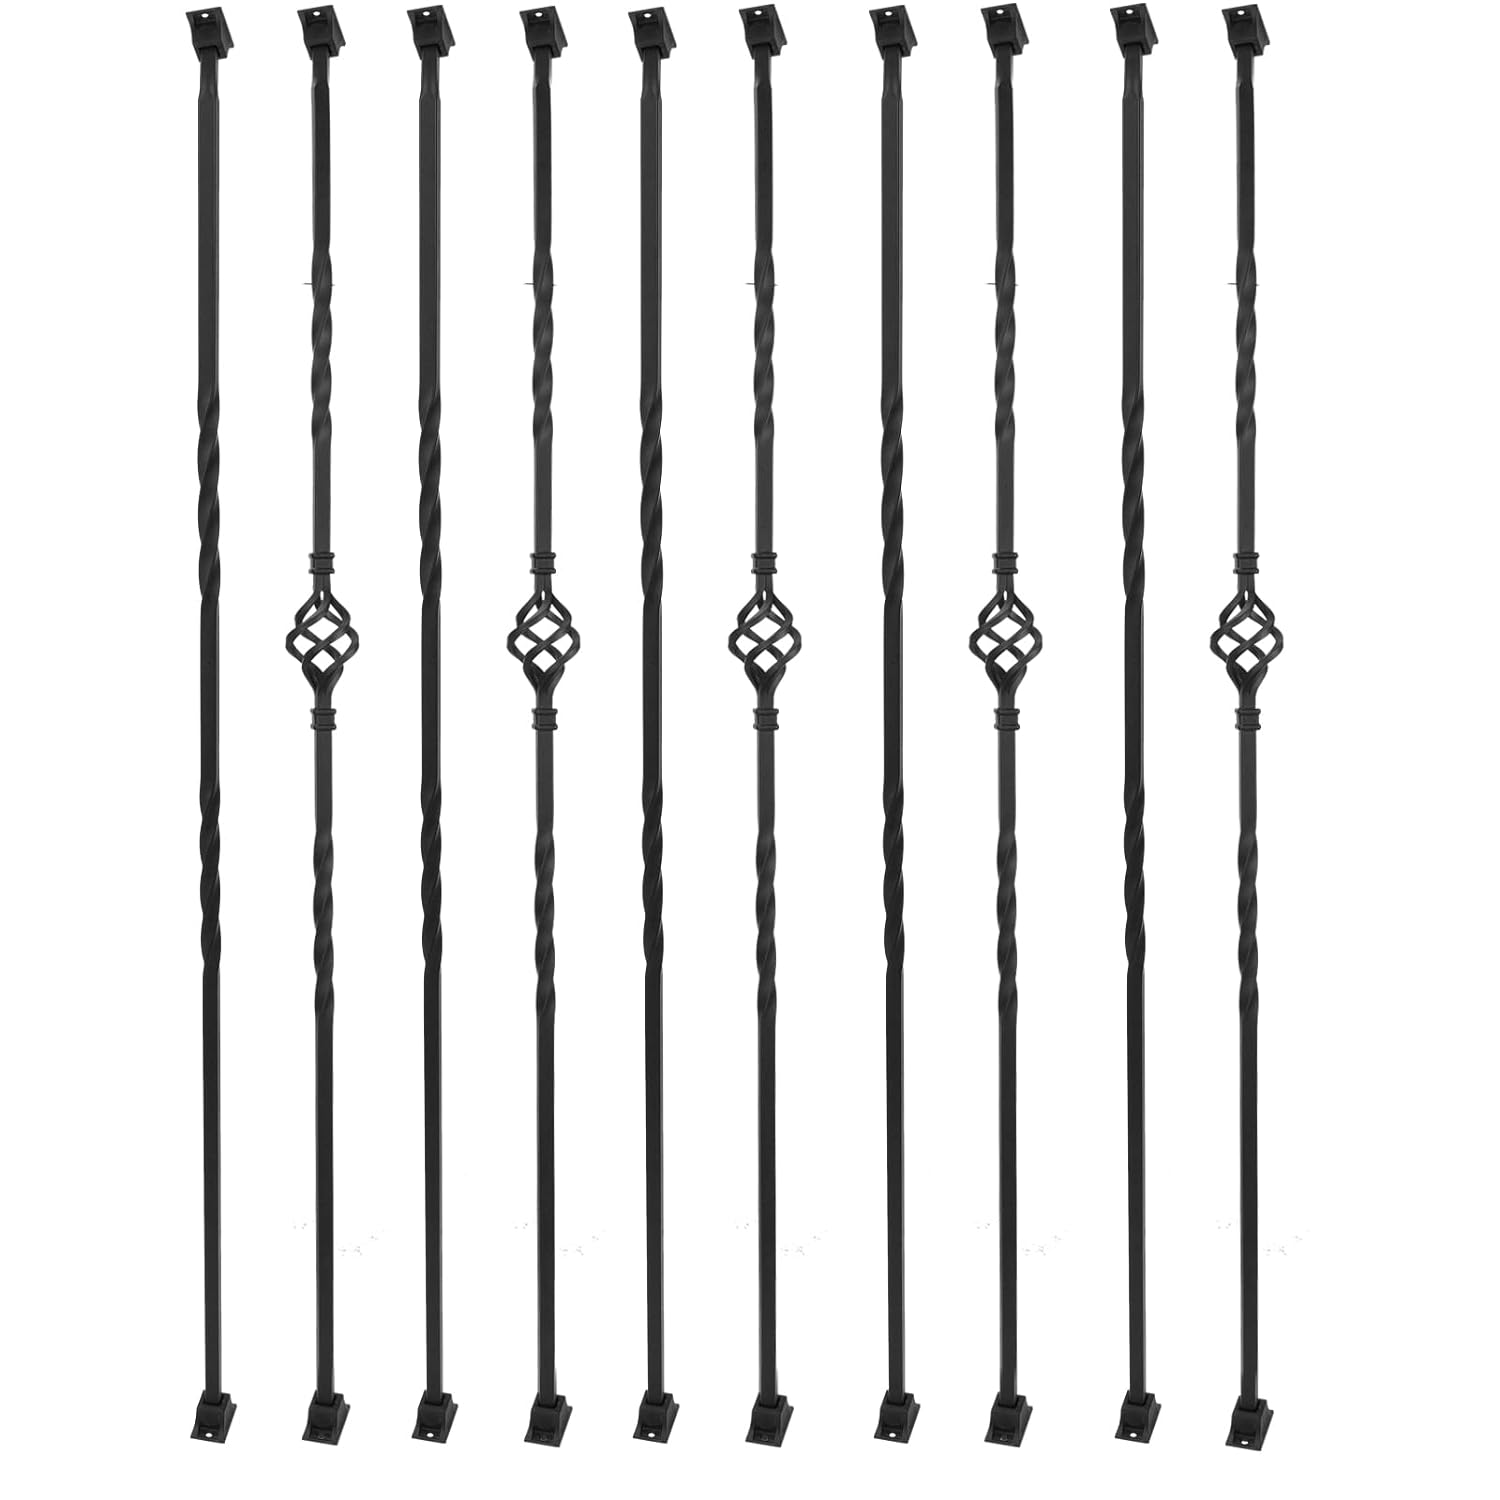 Generic Sidasu Wrought Iron Balusters Stair Spindles Set of 10 Hollow Single Basket Black Iron Spindles Double Twist 1/2" Square M